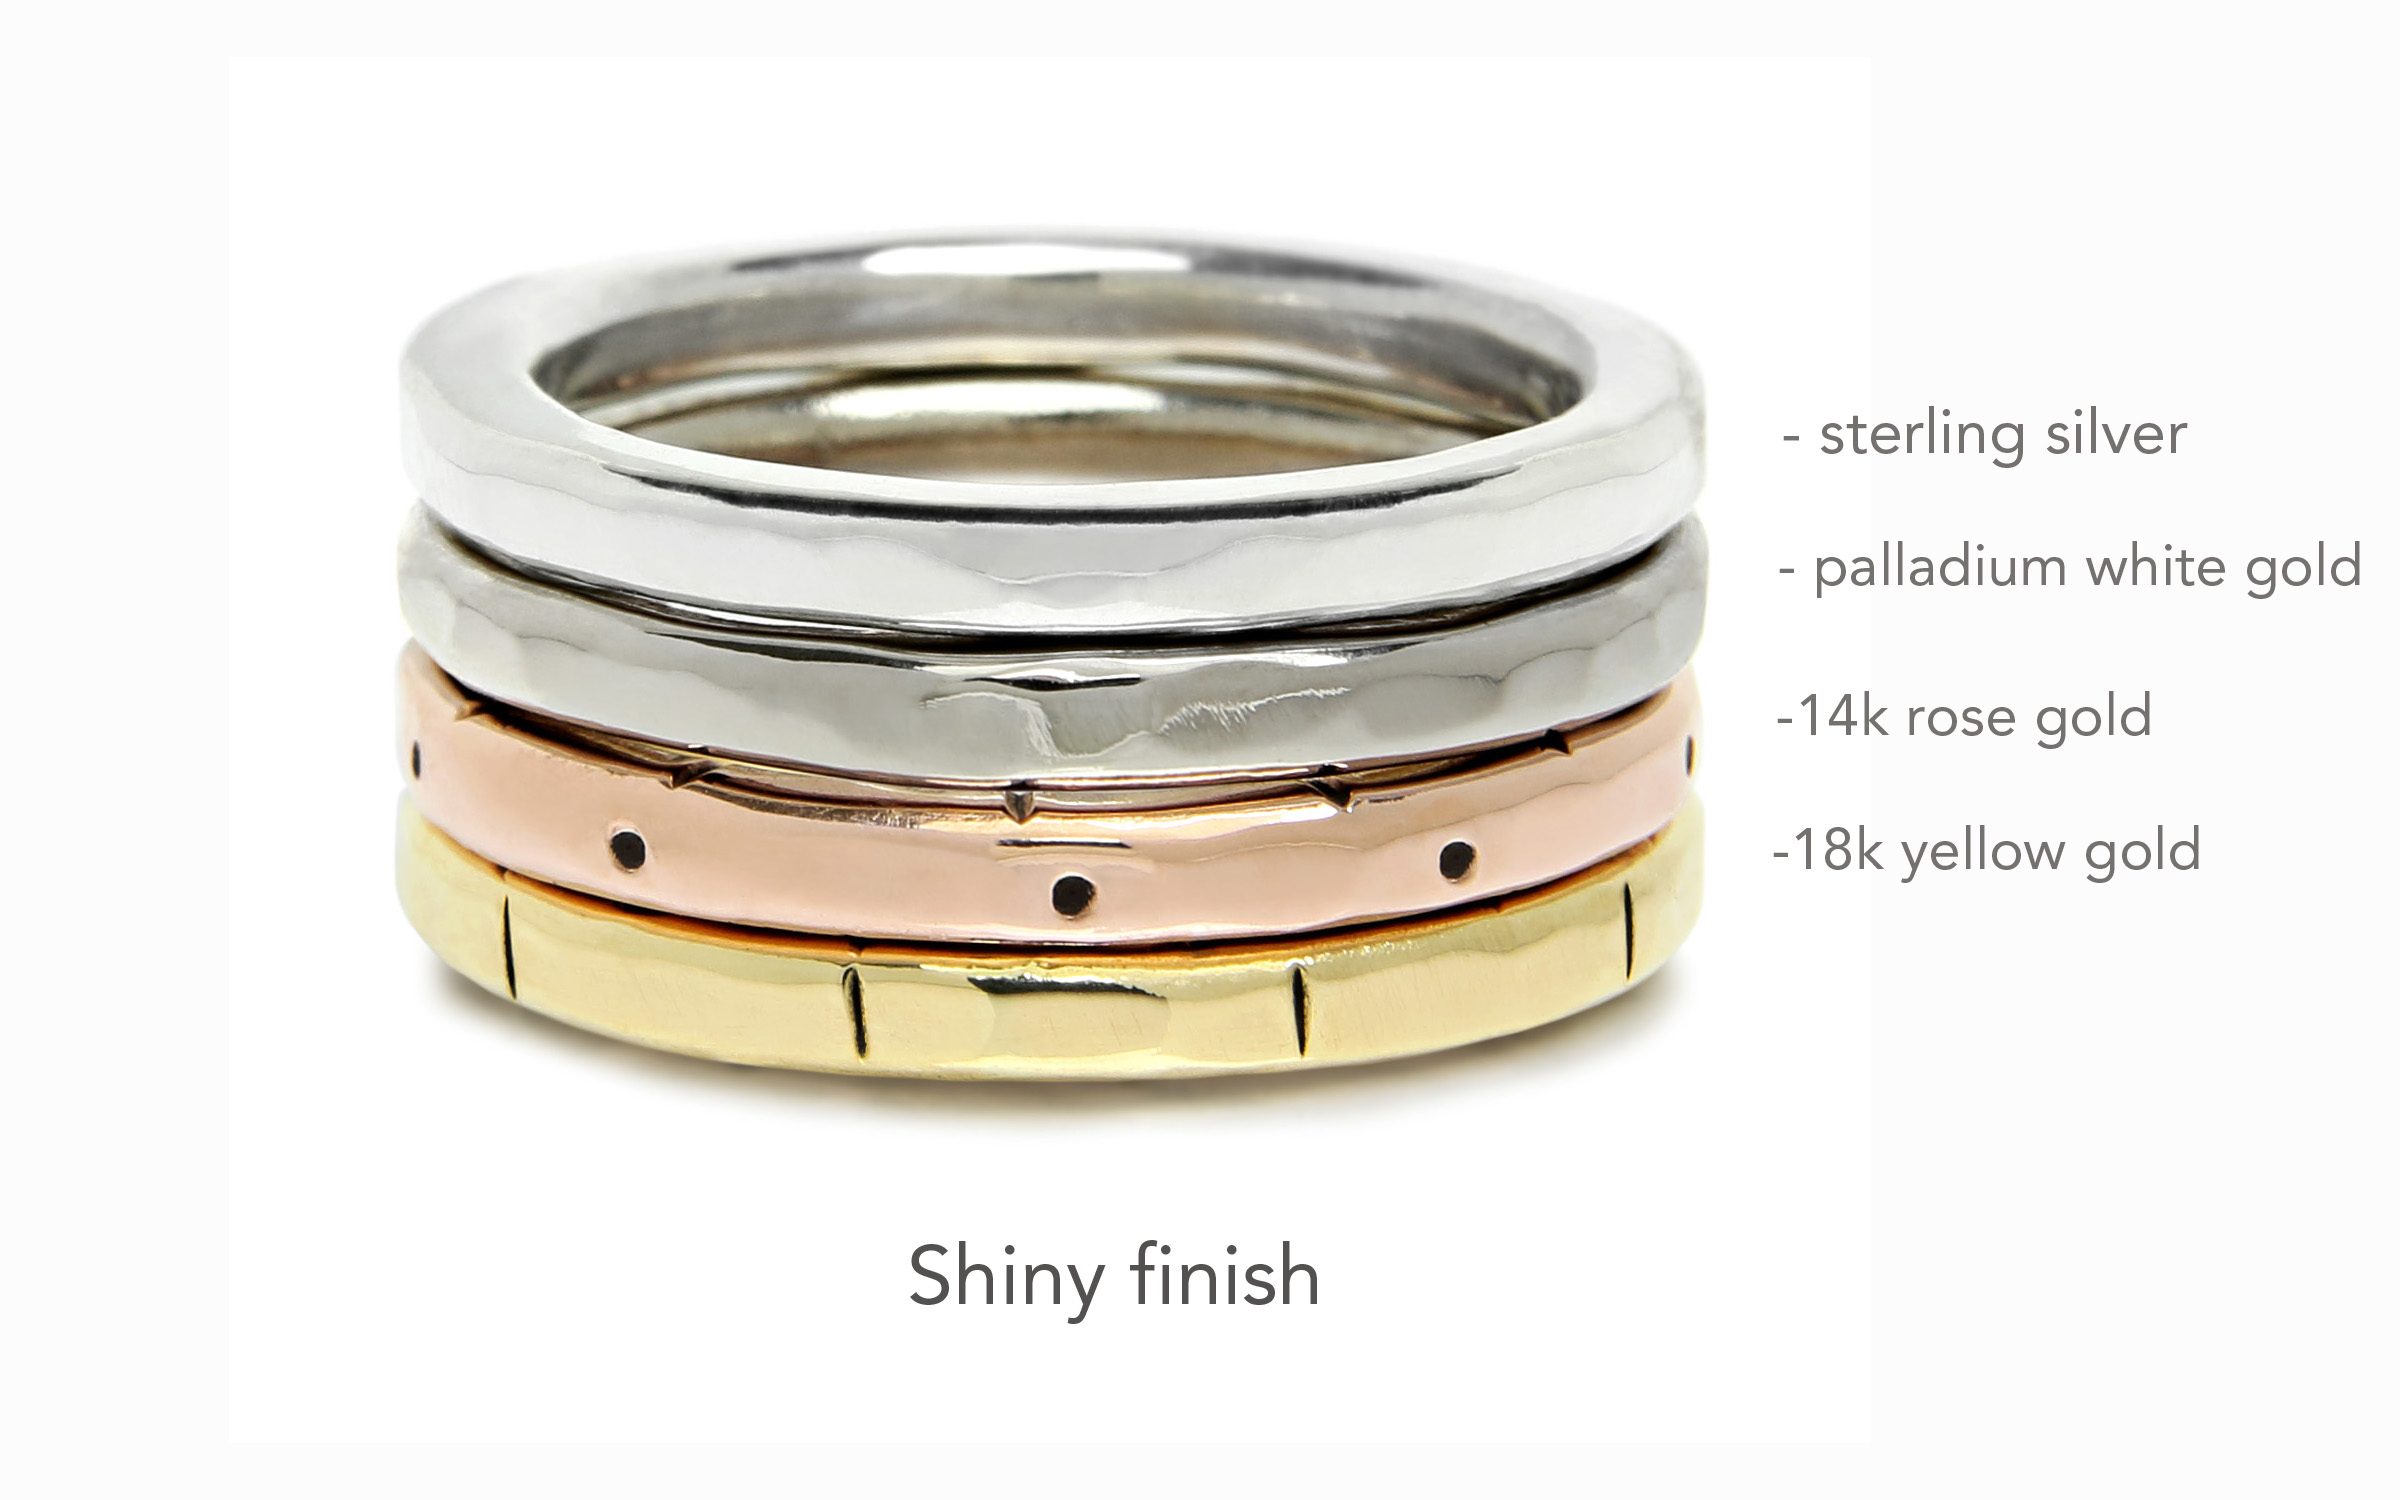 Gold and Silver Wedding Rings | Wedding rings sets gold, Silver wedding  rings, Matching wedding rings